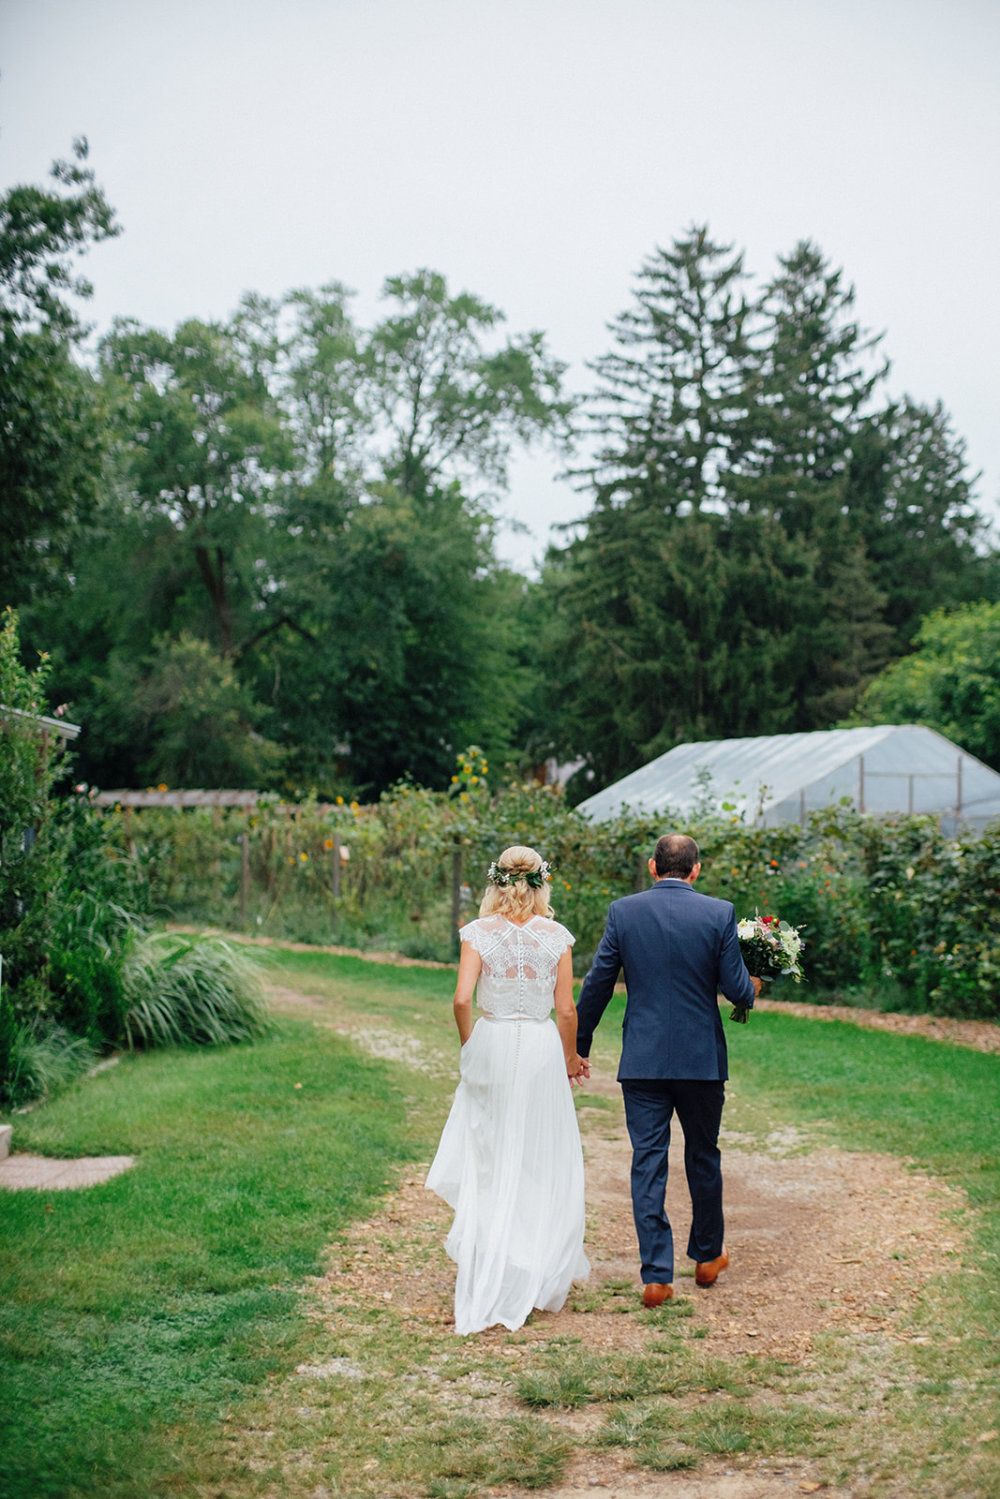 On their wedding day, a couple holds hands while walking past the gardens.